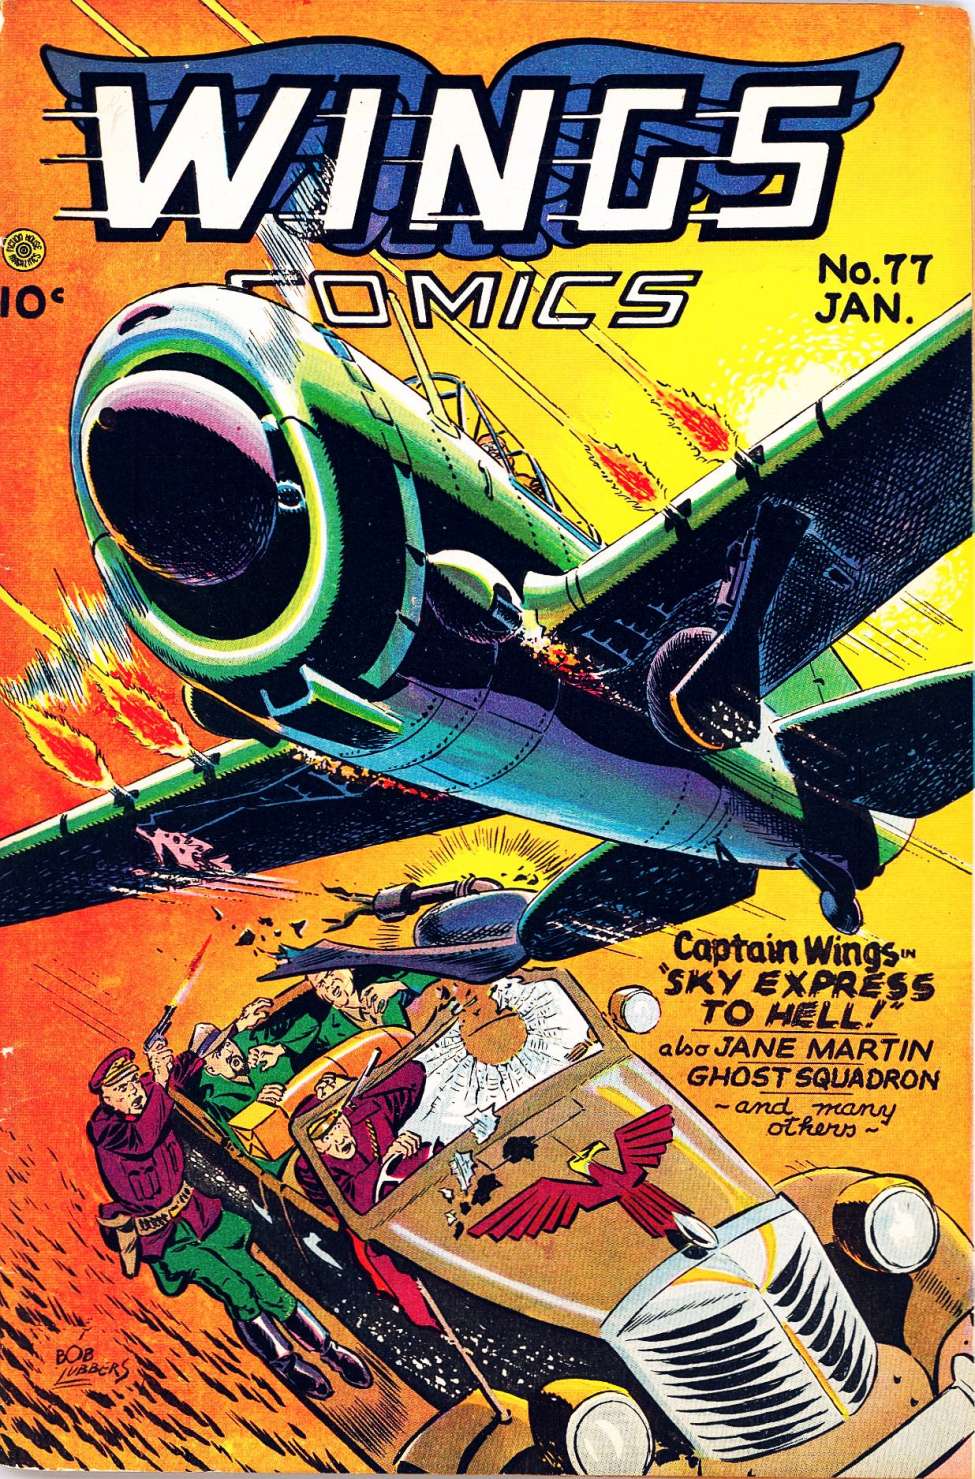 Book Cover For Wings Comics 77 - Version 1